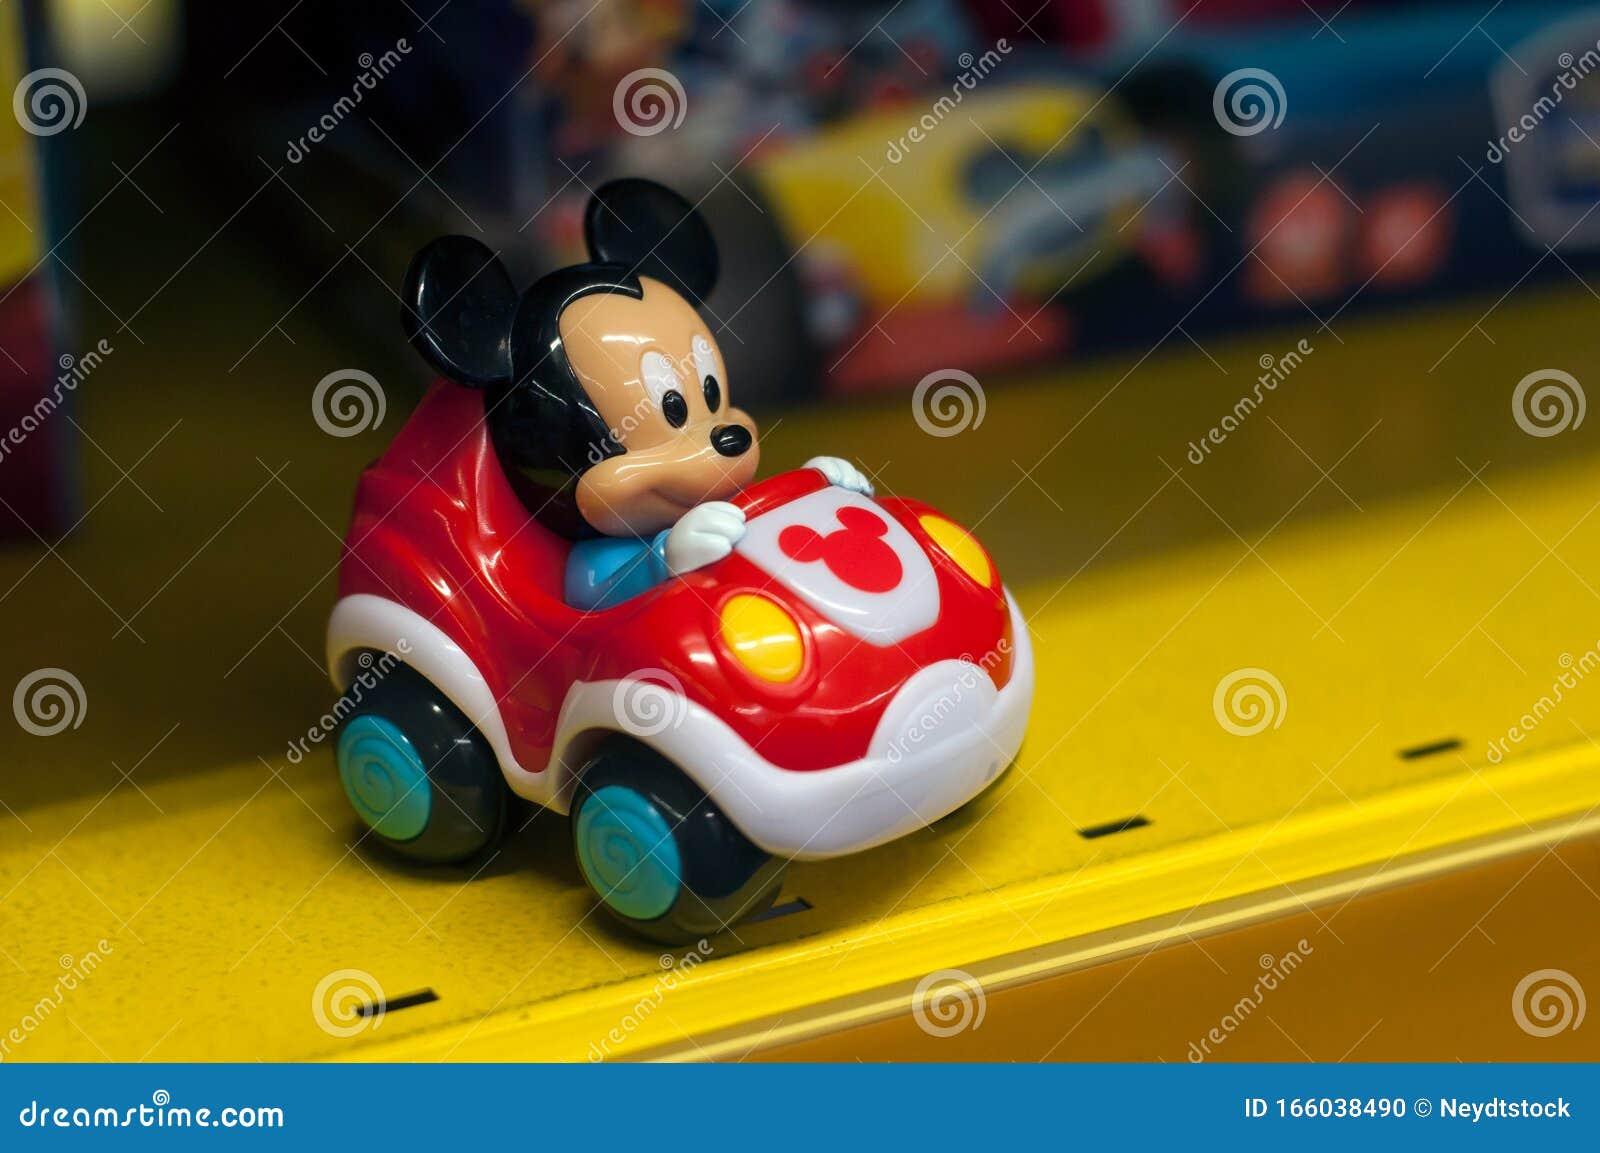 Mickey Mouse Character in Plastic Car in a Toy Store Supermarket Editorial  Image - Image of action, american: 166038490